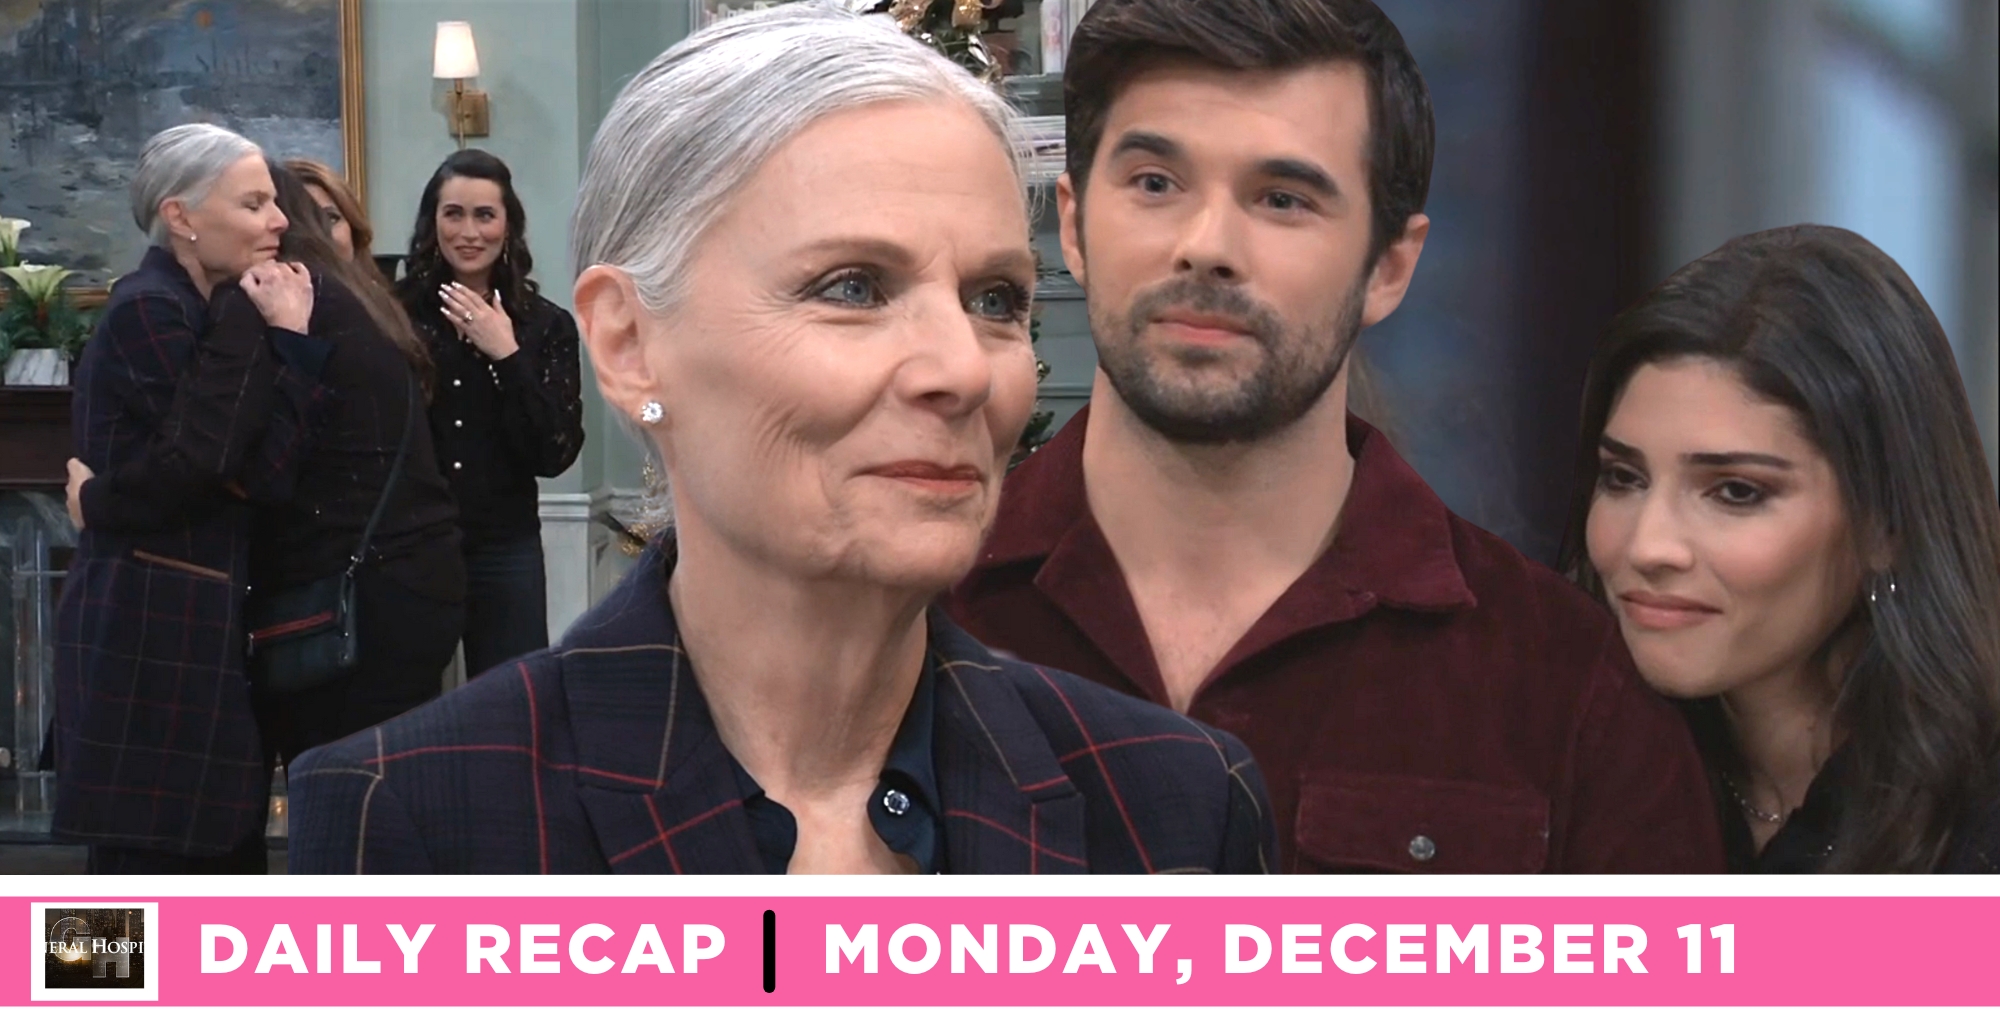 brook lynn quartermaine and harrison chase told tracy quartermaine they are engaged on general hospital recap for monday, december 11, 2023..